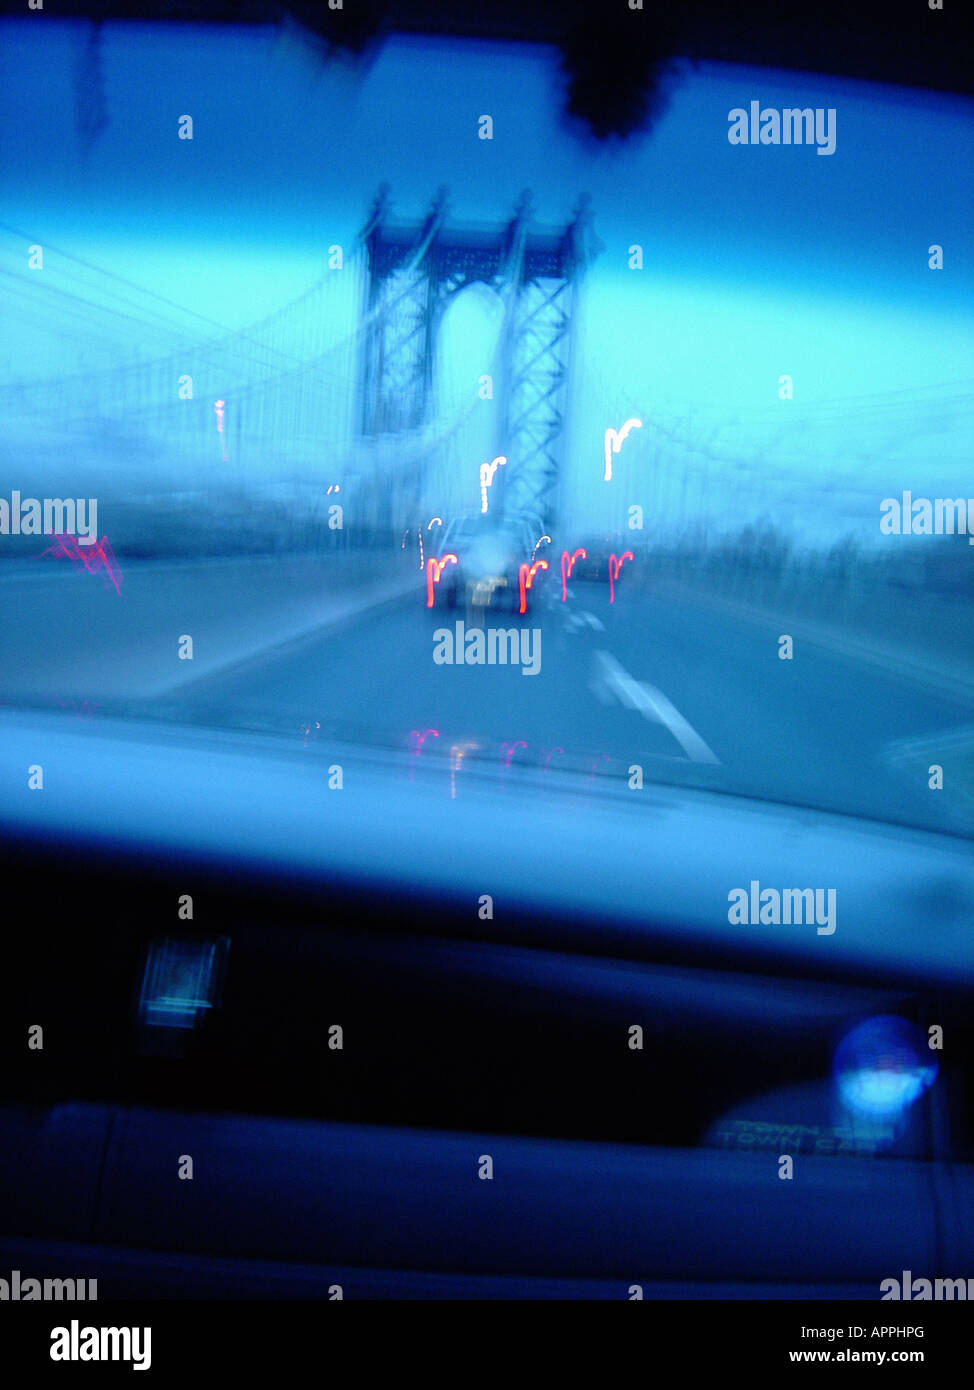 Early Morning Urban Scene of the Manhattan Bridge in New York City as Viewed From a Car Motion Blur Copy Space Stock Photo